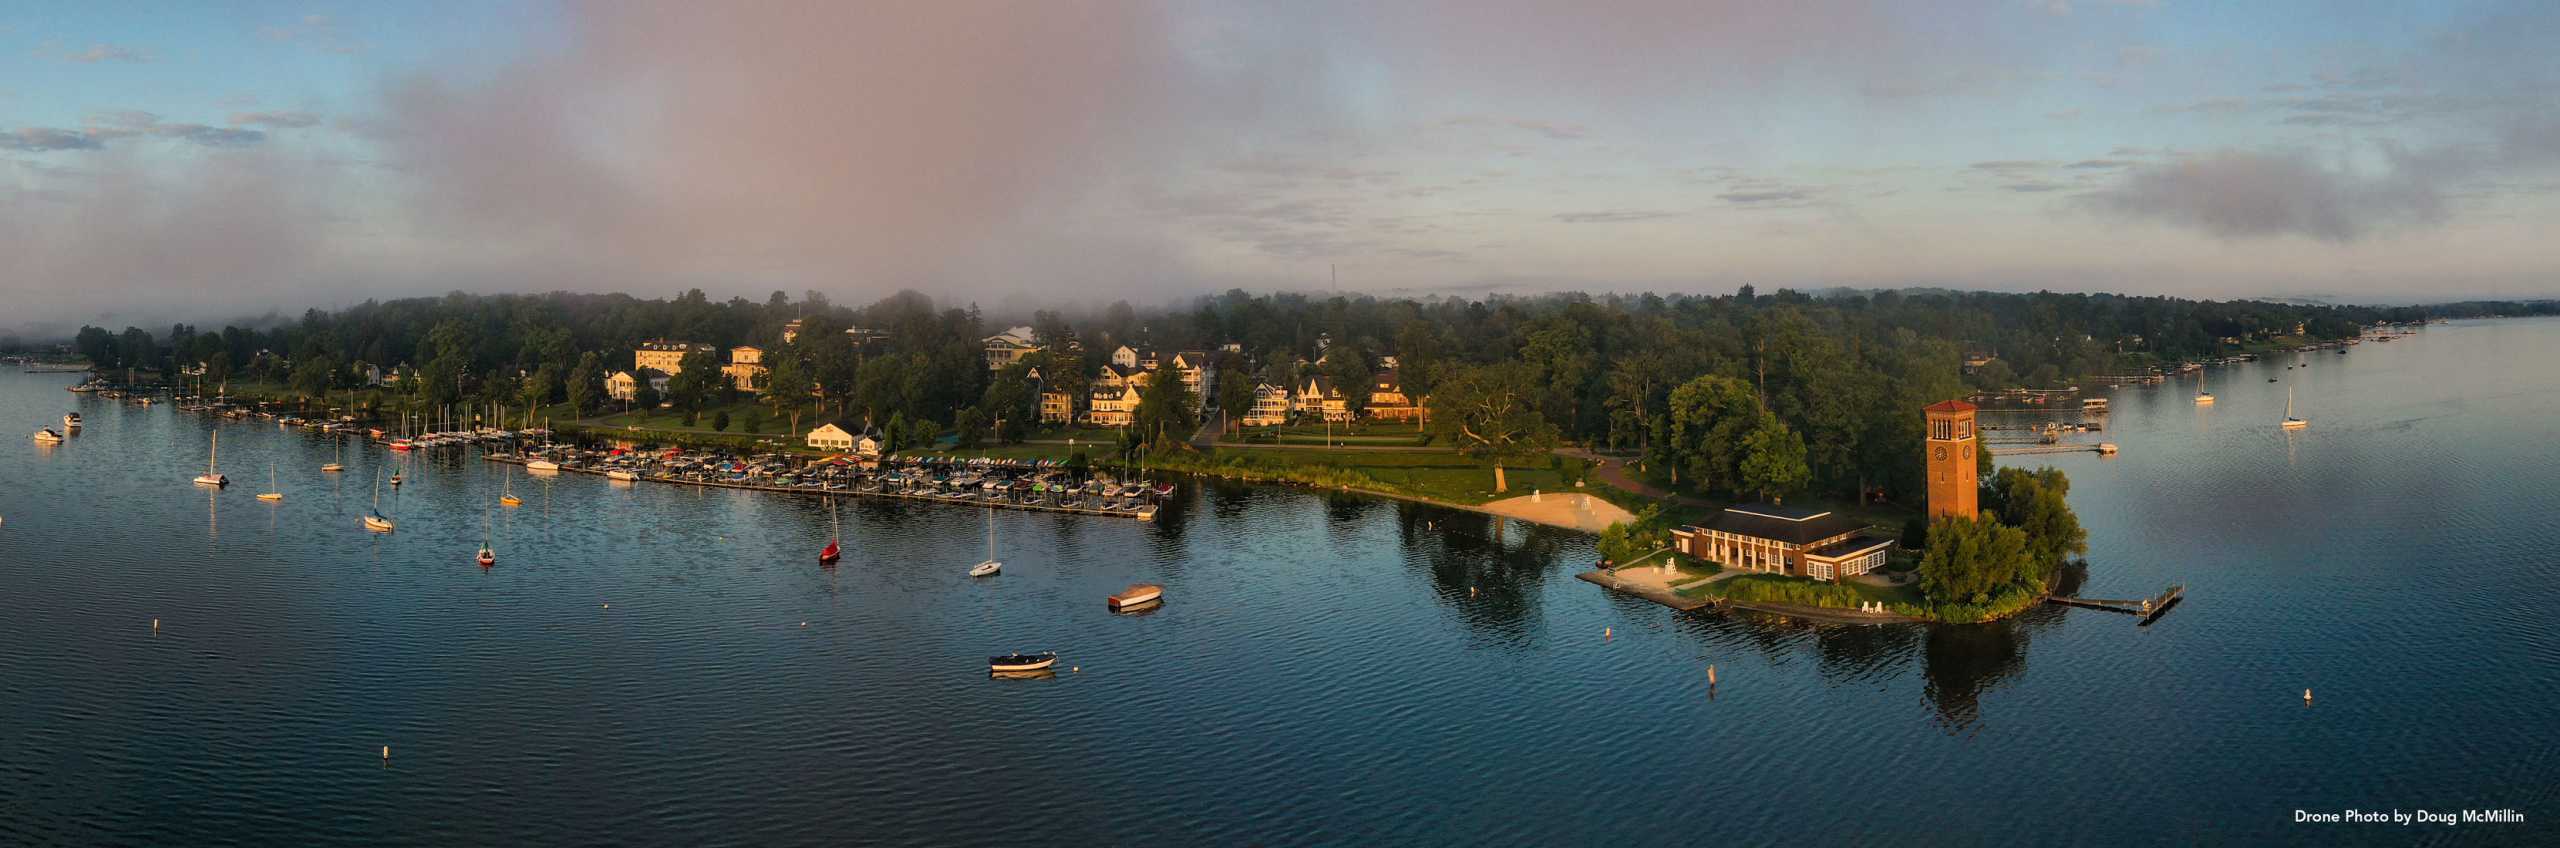 Drone photo of lakefront by Doug McMillin